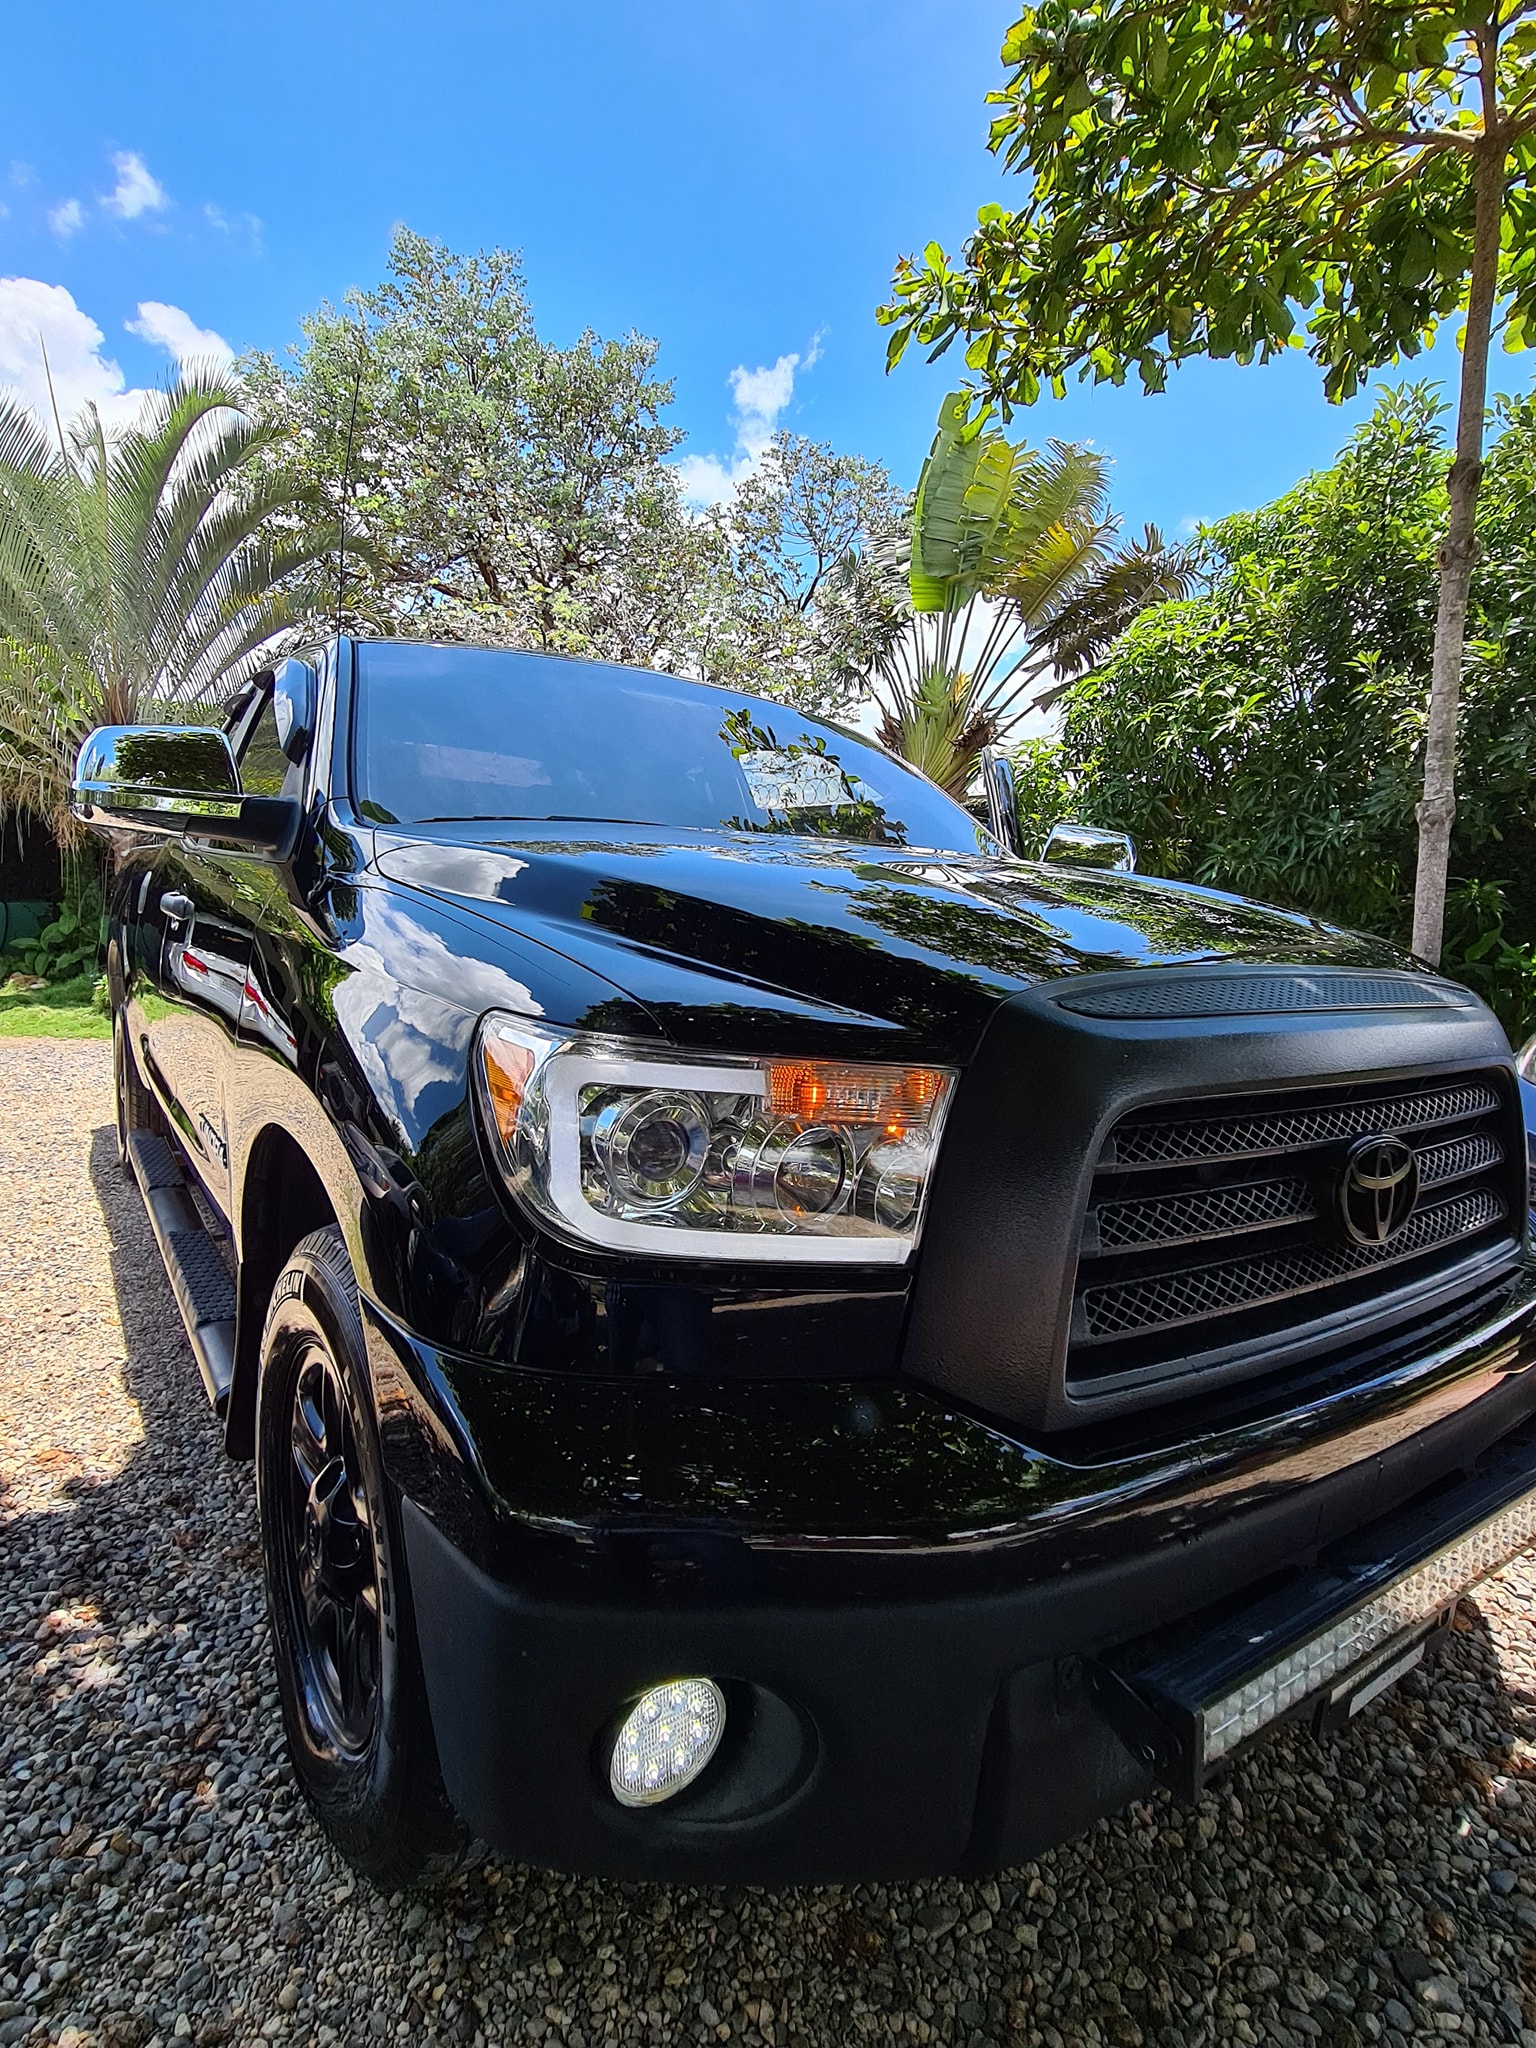 Toyota tundra 6 cilindros varias extras hilux 4runner prado tacoma l200 dmax tuning pickup np300